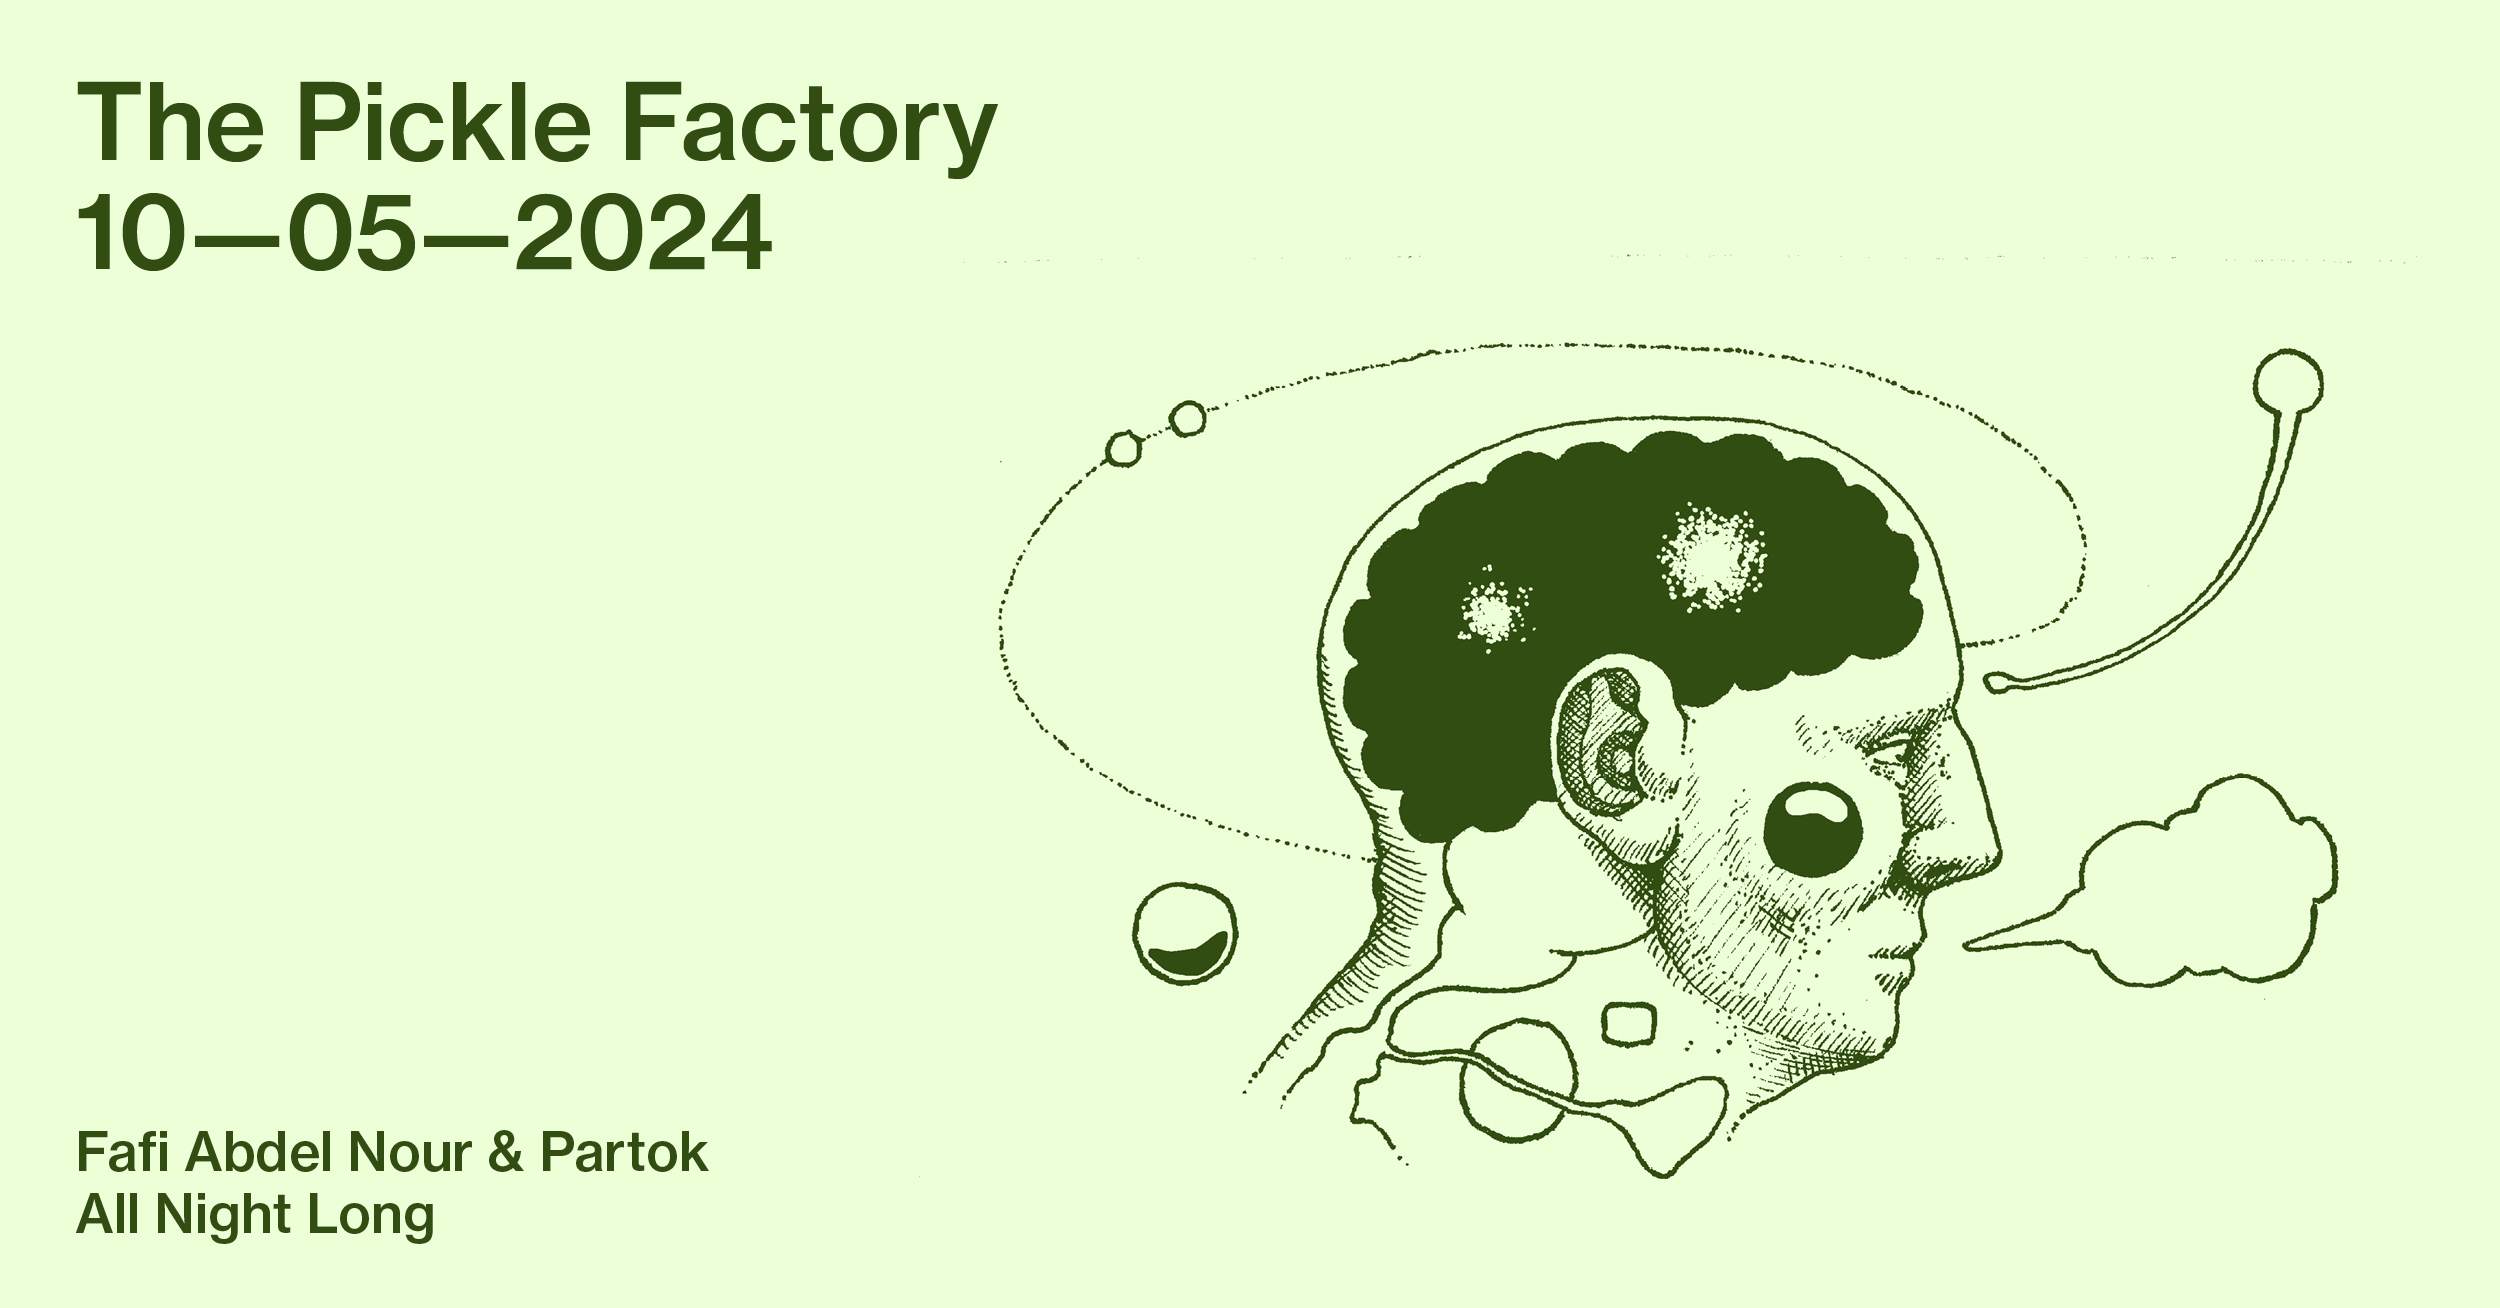 The Pickle Factory with Fafi Abdel Nour & Partok All Night Long - Página frontal